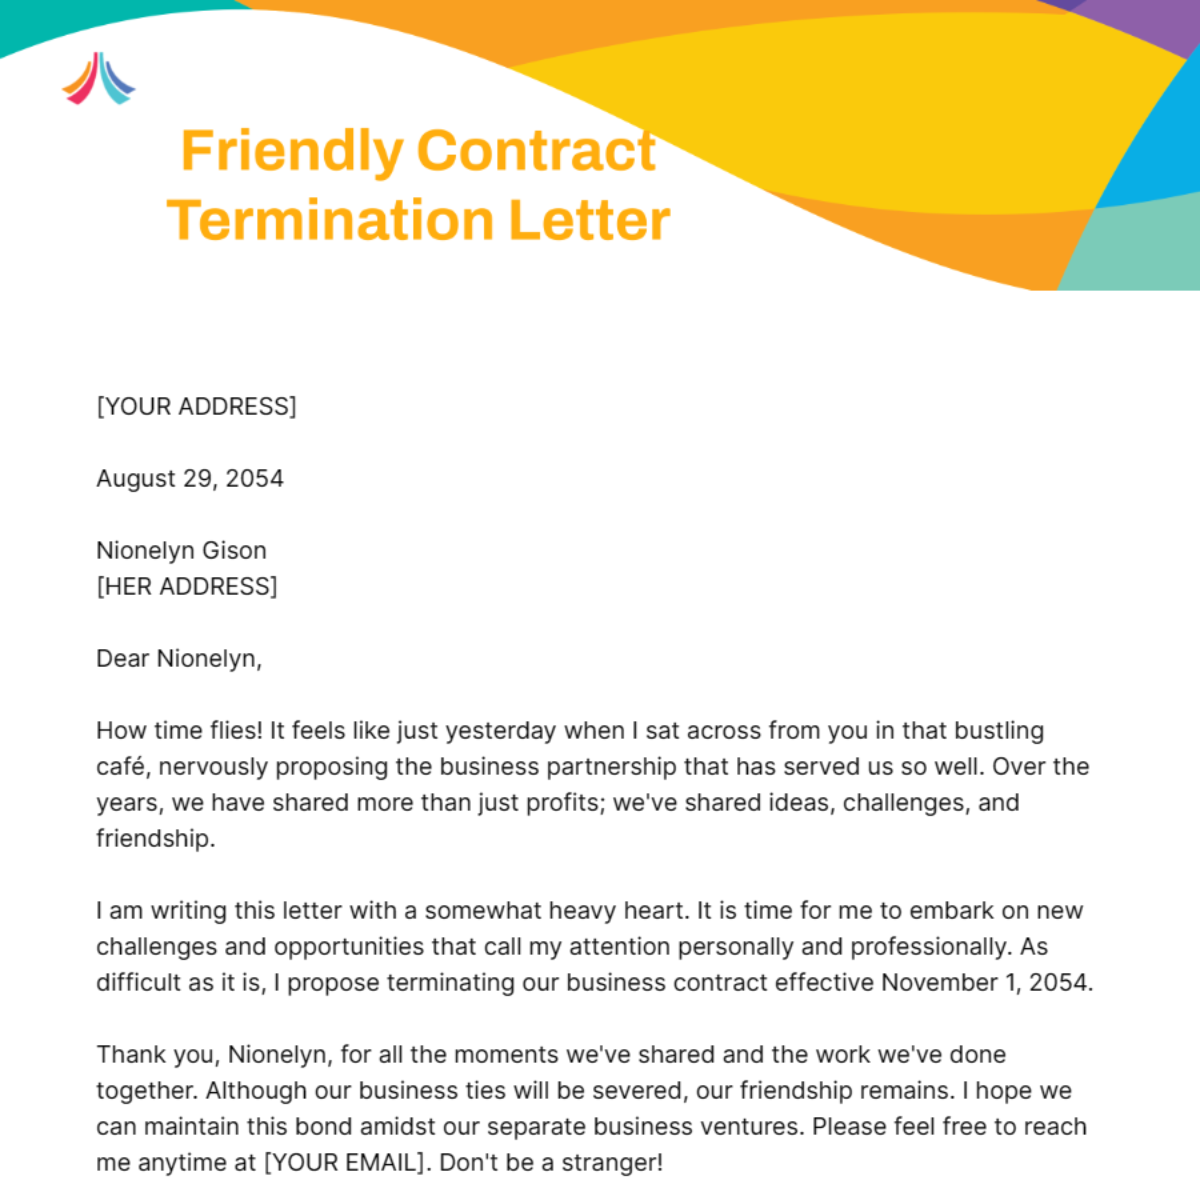 Friendly Contract Termination Letter Template